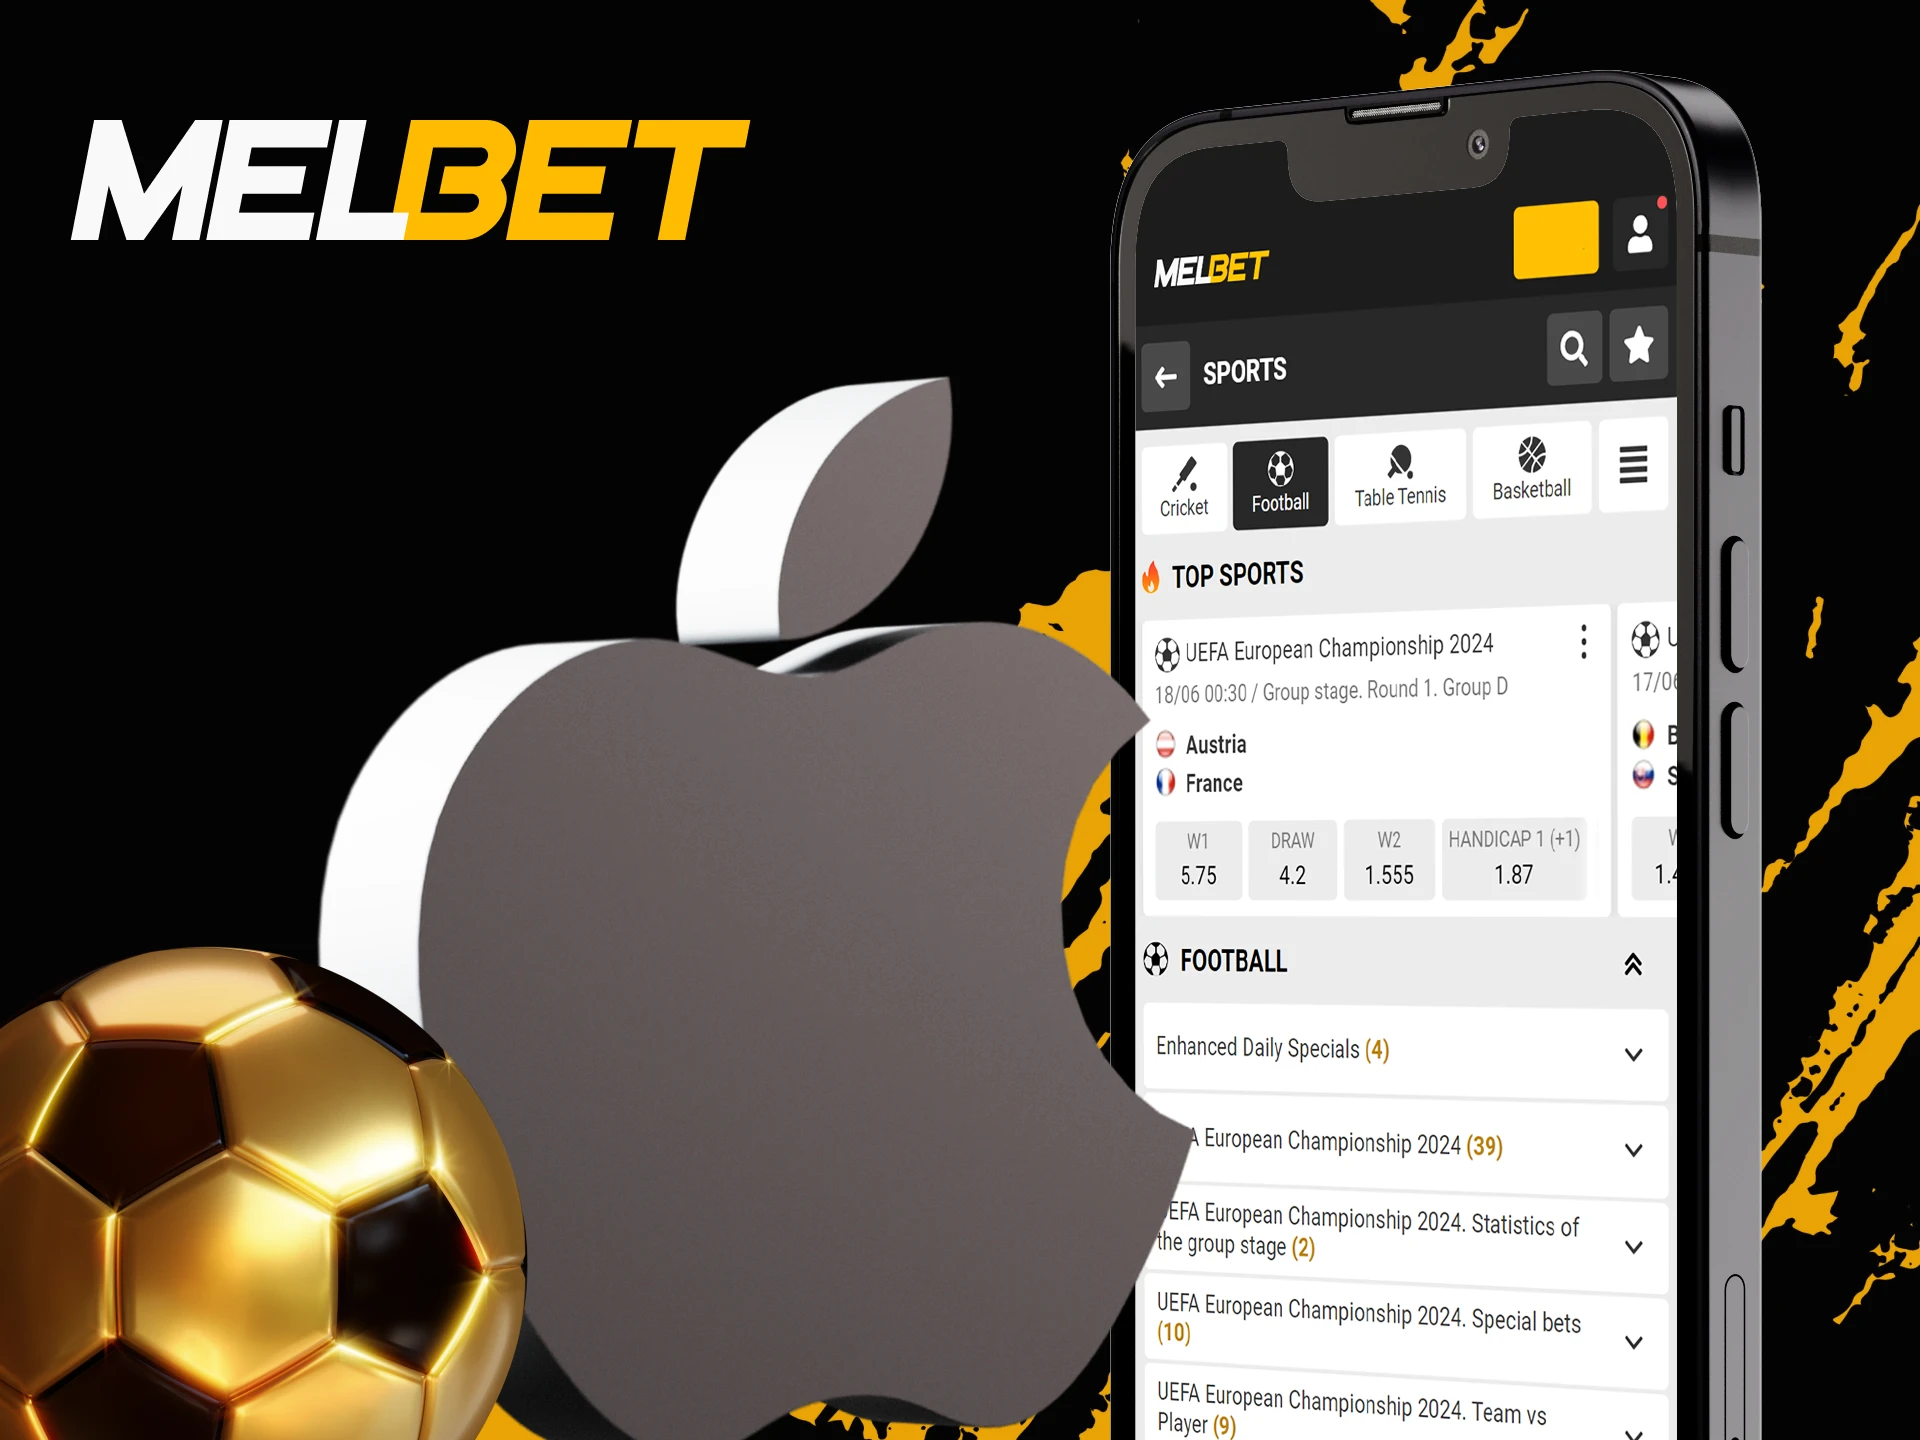 Place your football bets wherever you are using the Melbet mobile app on your iOS device.